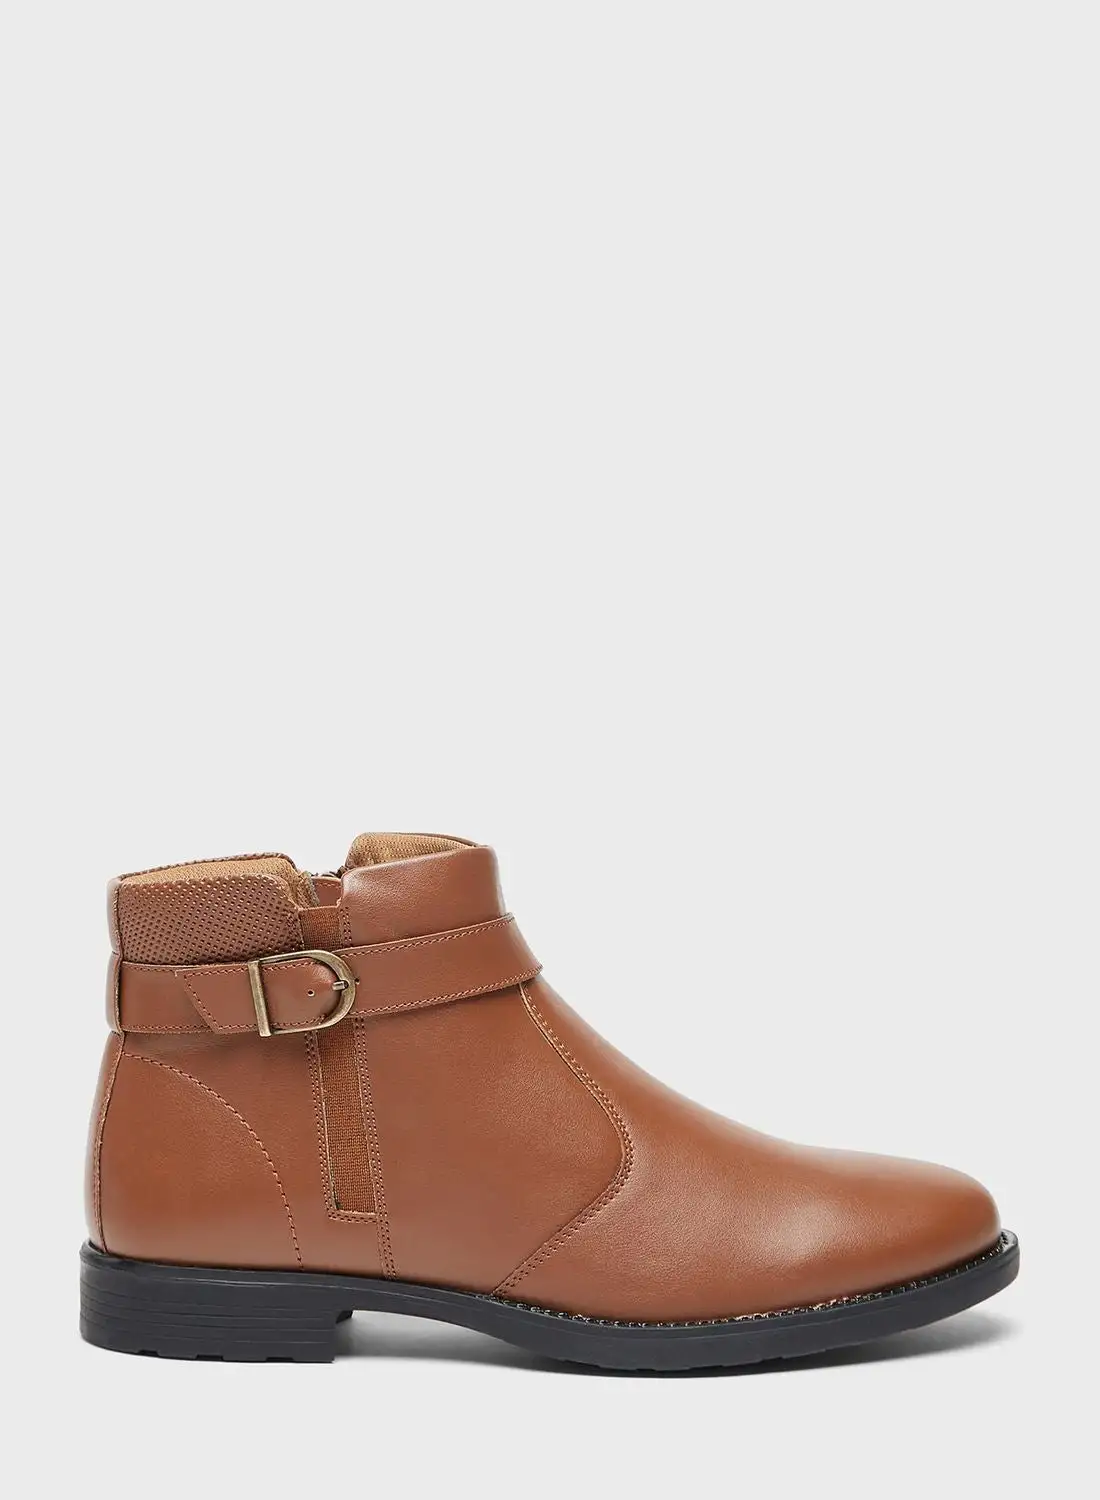 LBL by Shoexpress Formal Boot